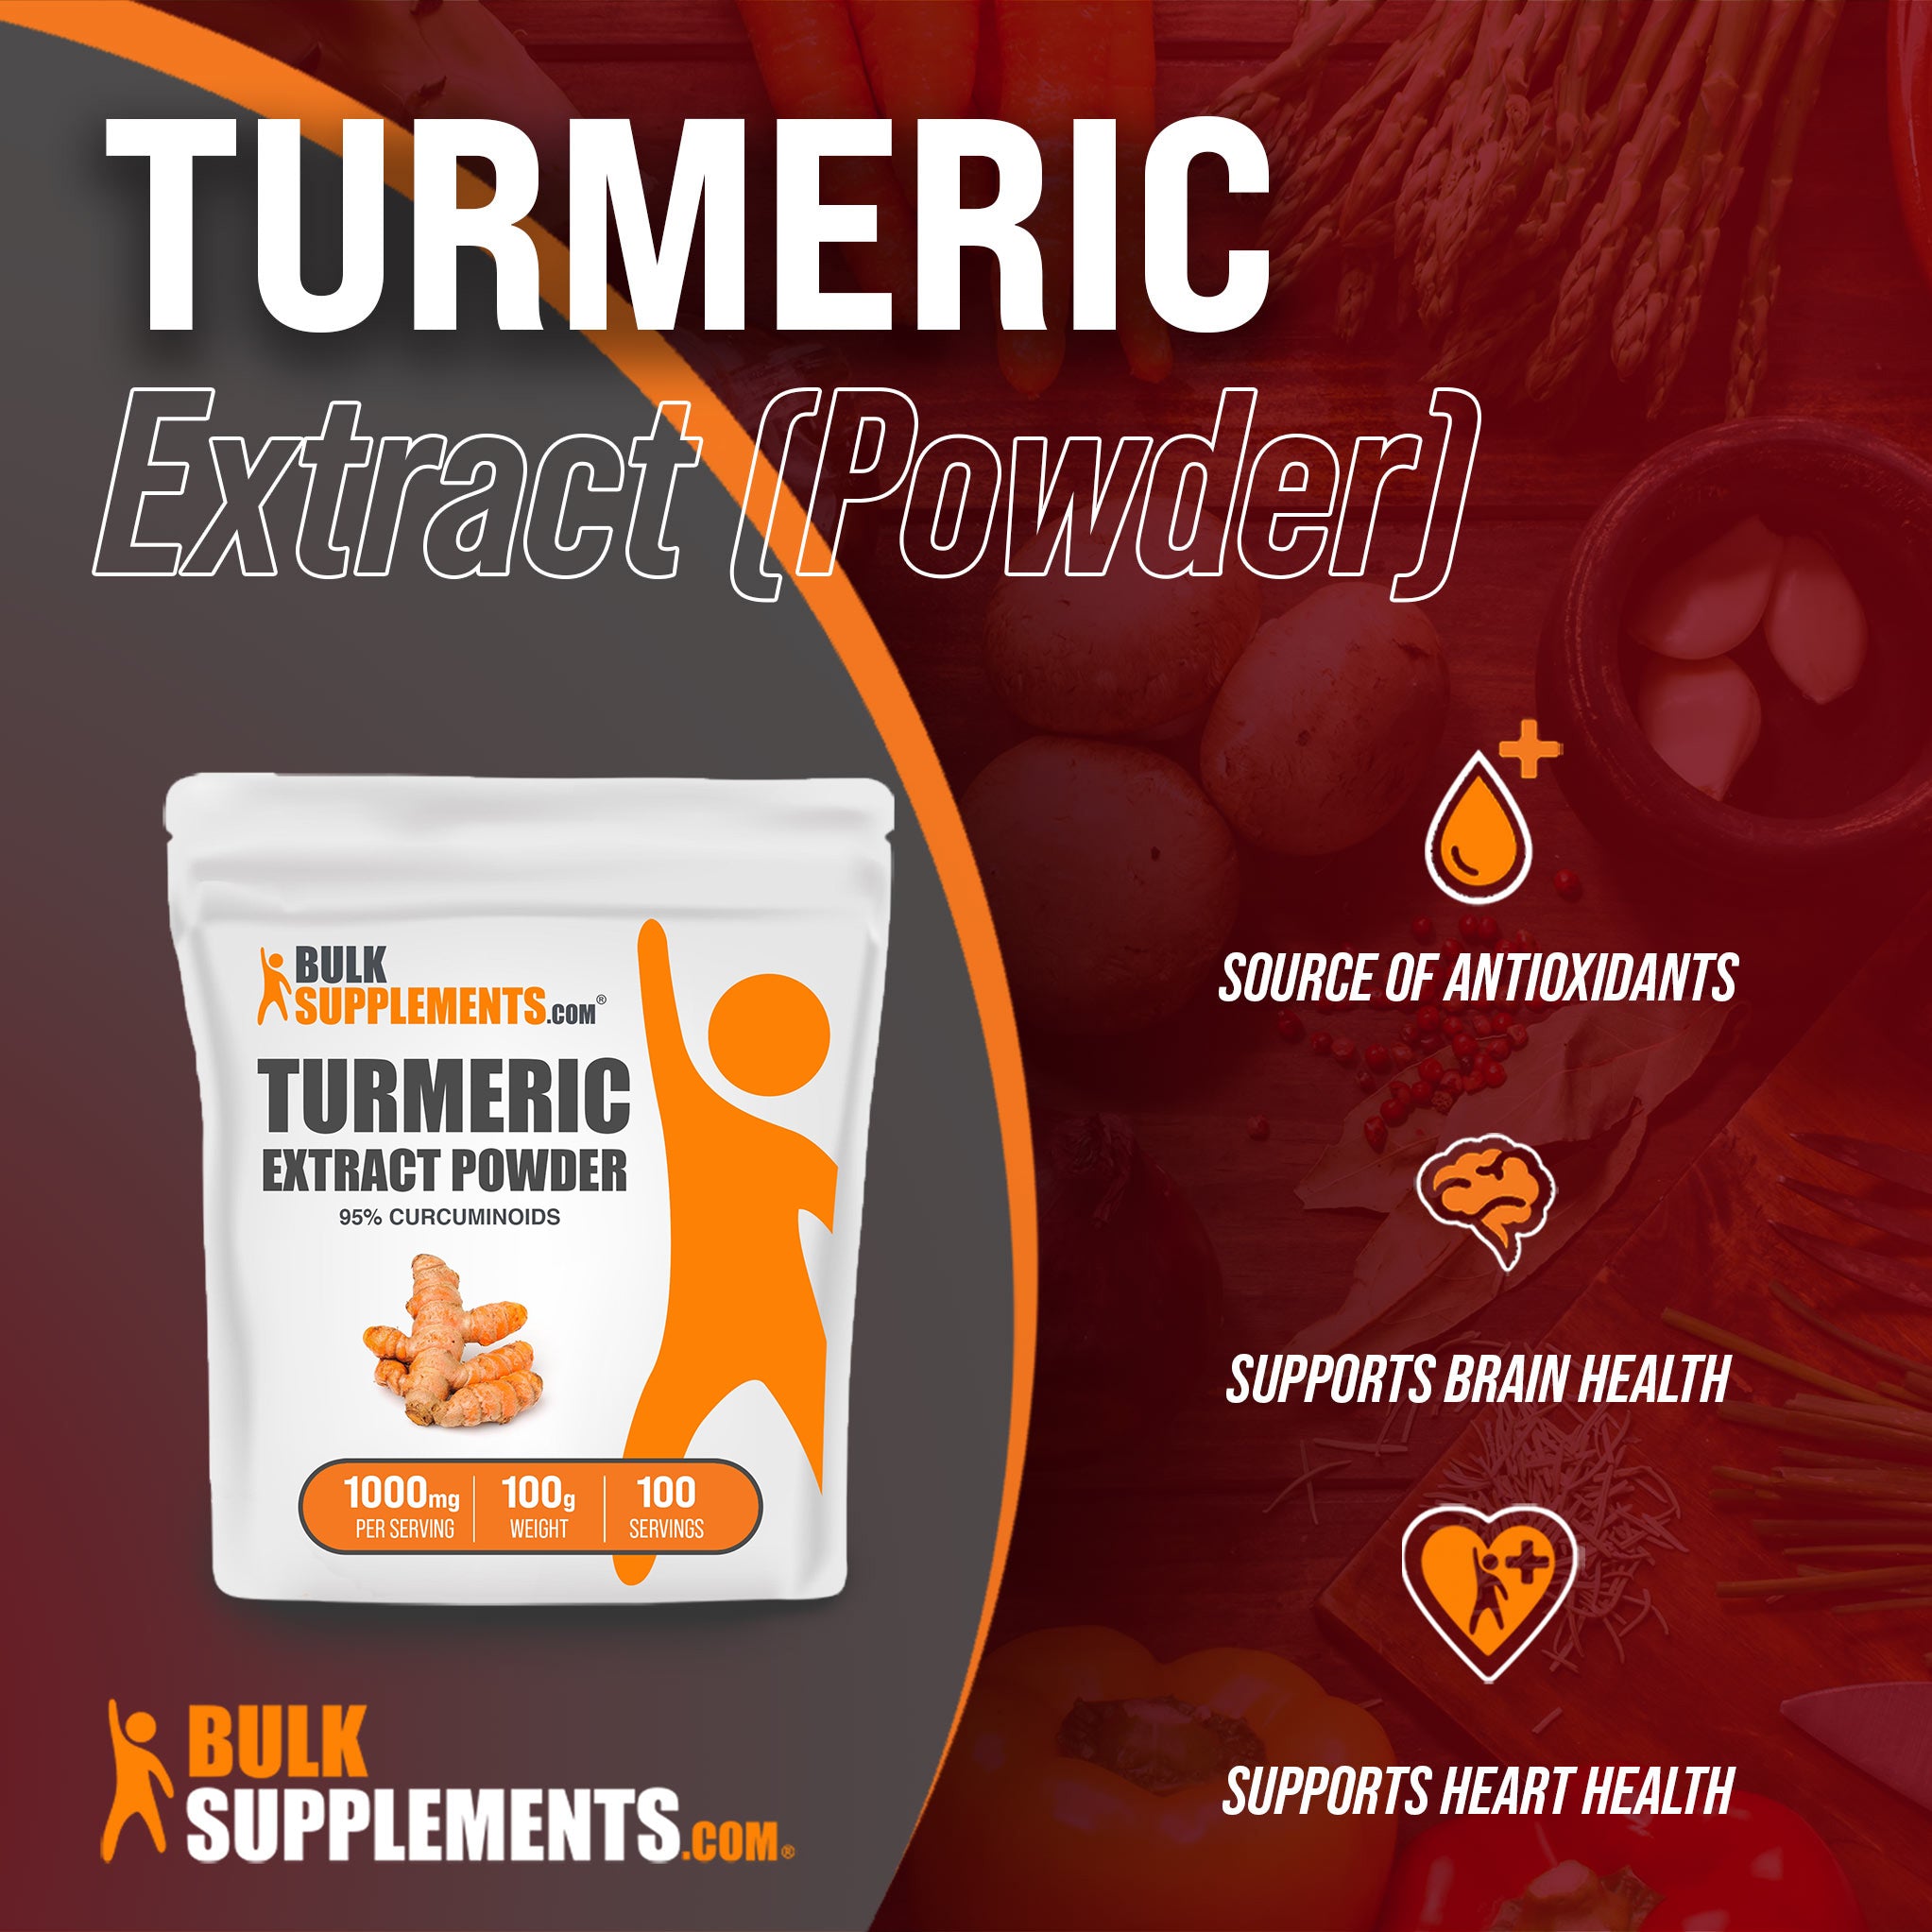 Benefits of Turmeric Extract: source of antioxidants, supports brain health, supports heart health